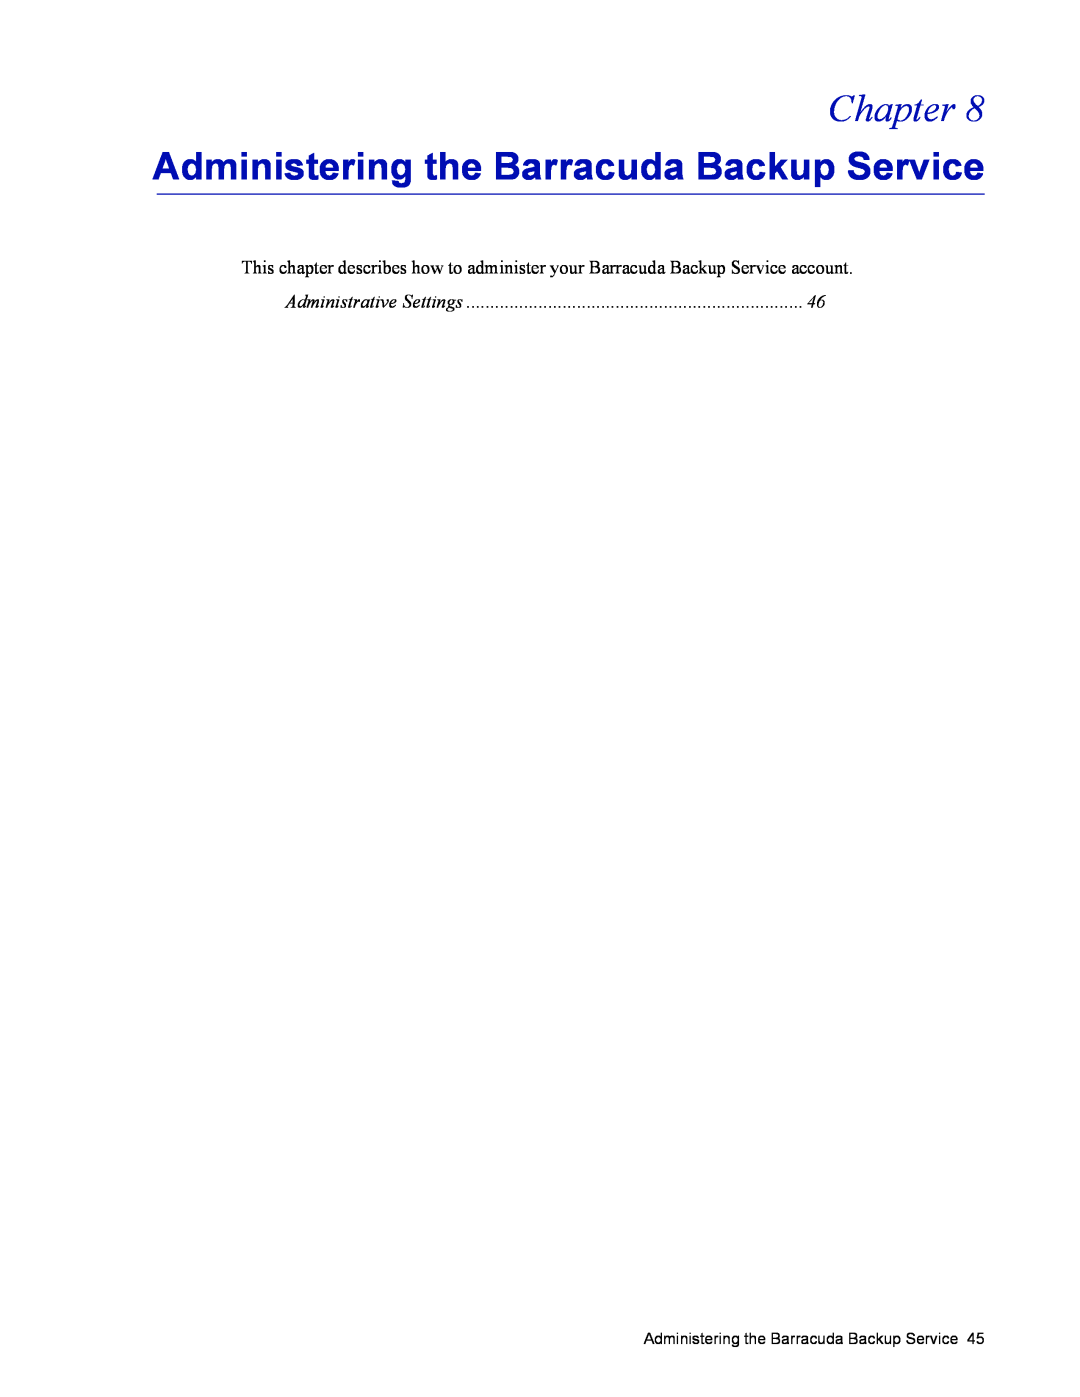 Barracuda Networks 4 manual Administering the Barracuda Backup Service, Chapter, Administrative Settings 